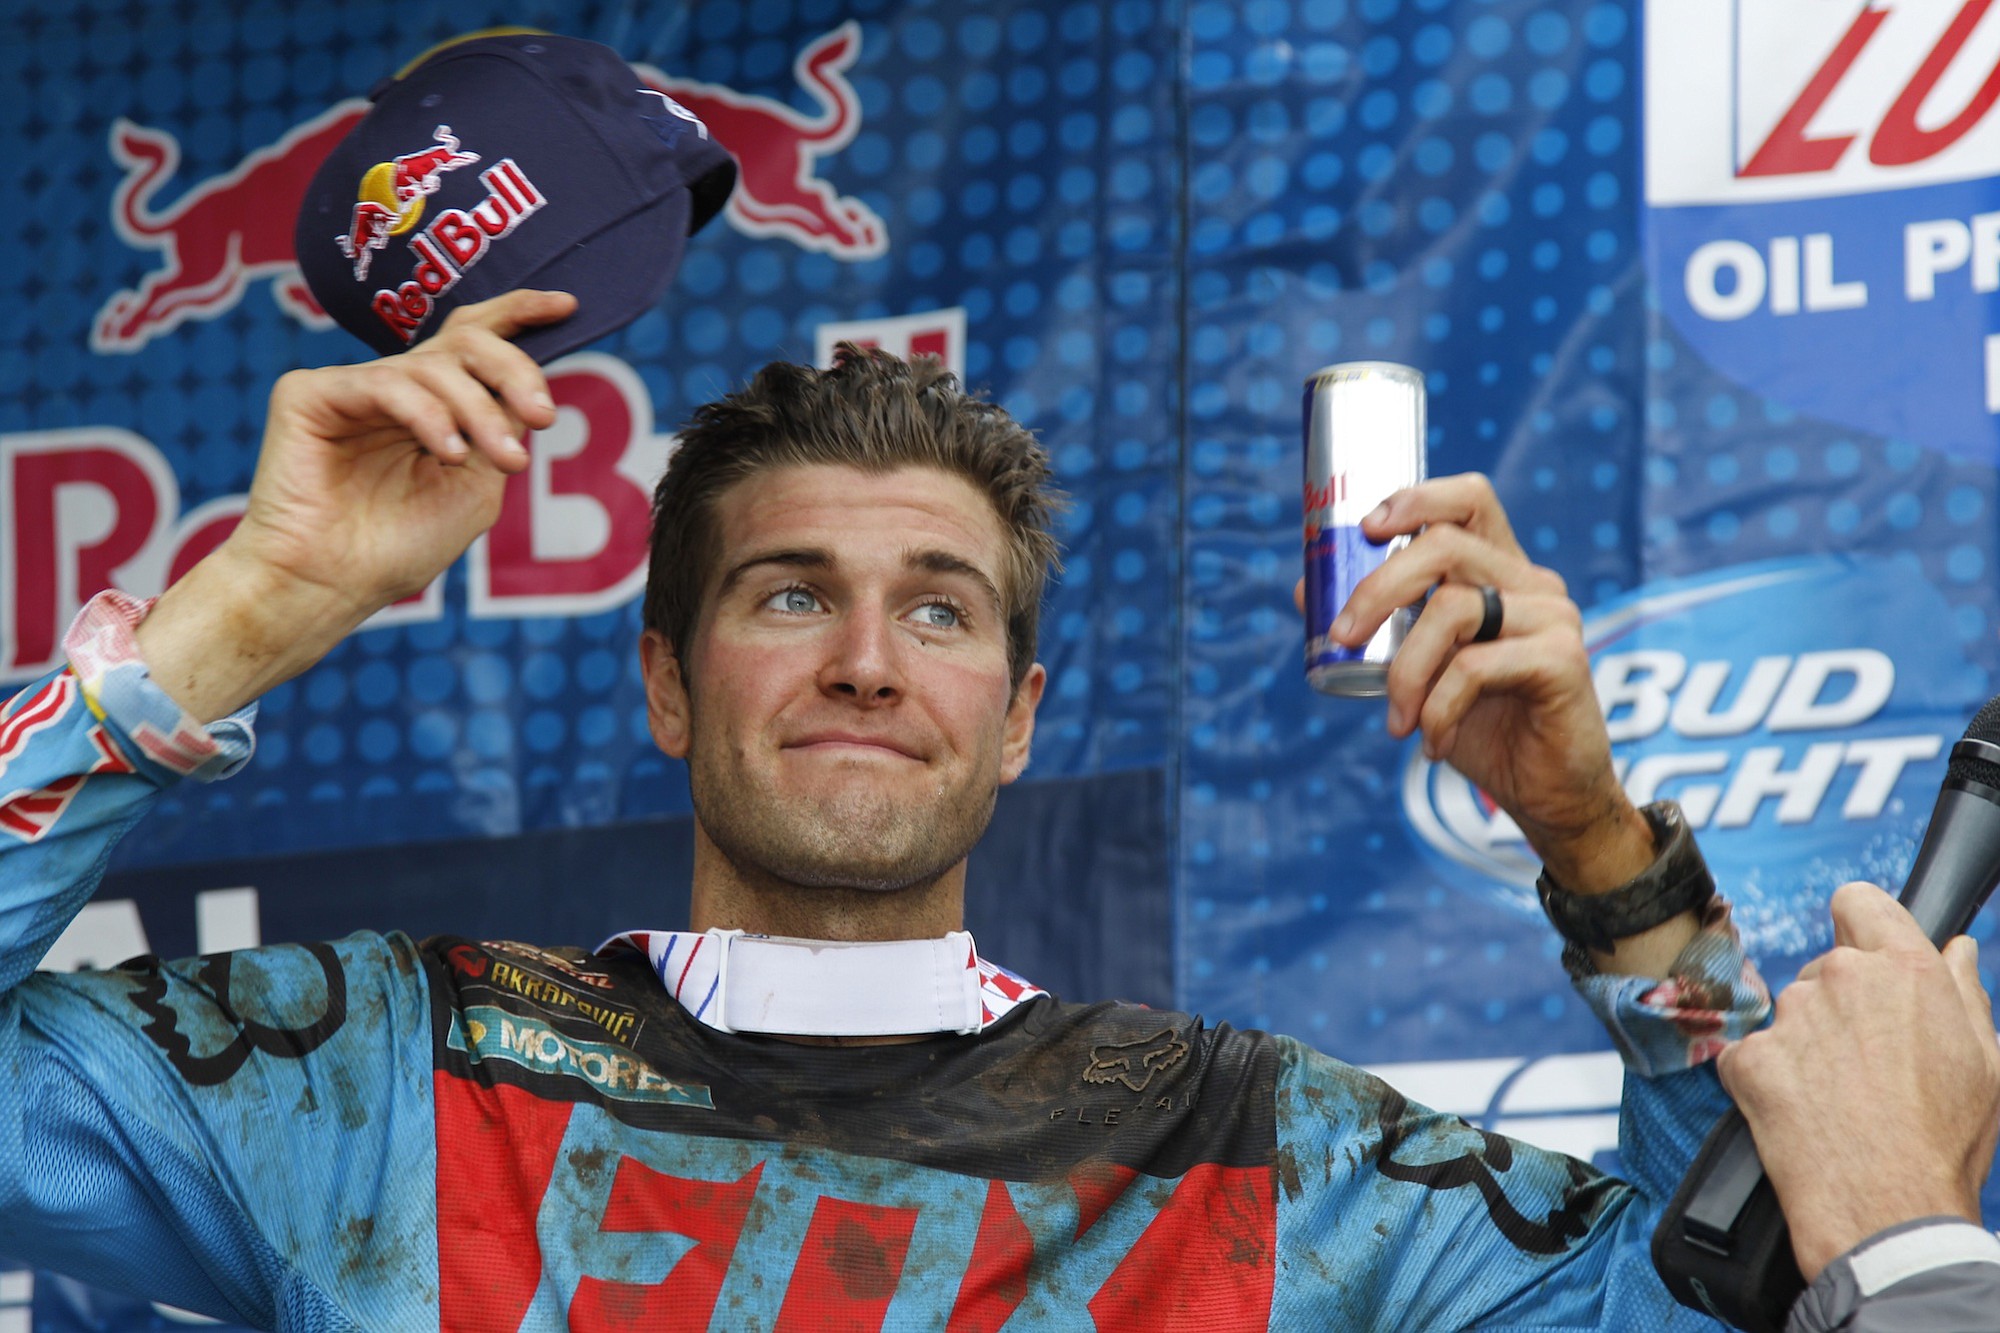 Ryan Dungey reacts after win in 450 MX2 at the Washougal National Motocross.